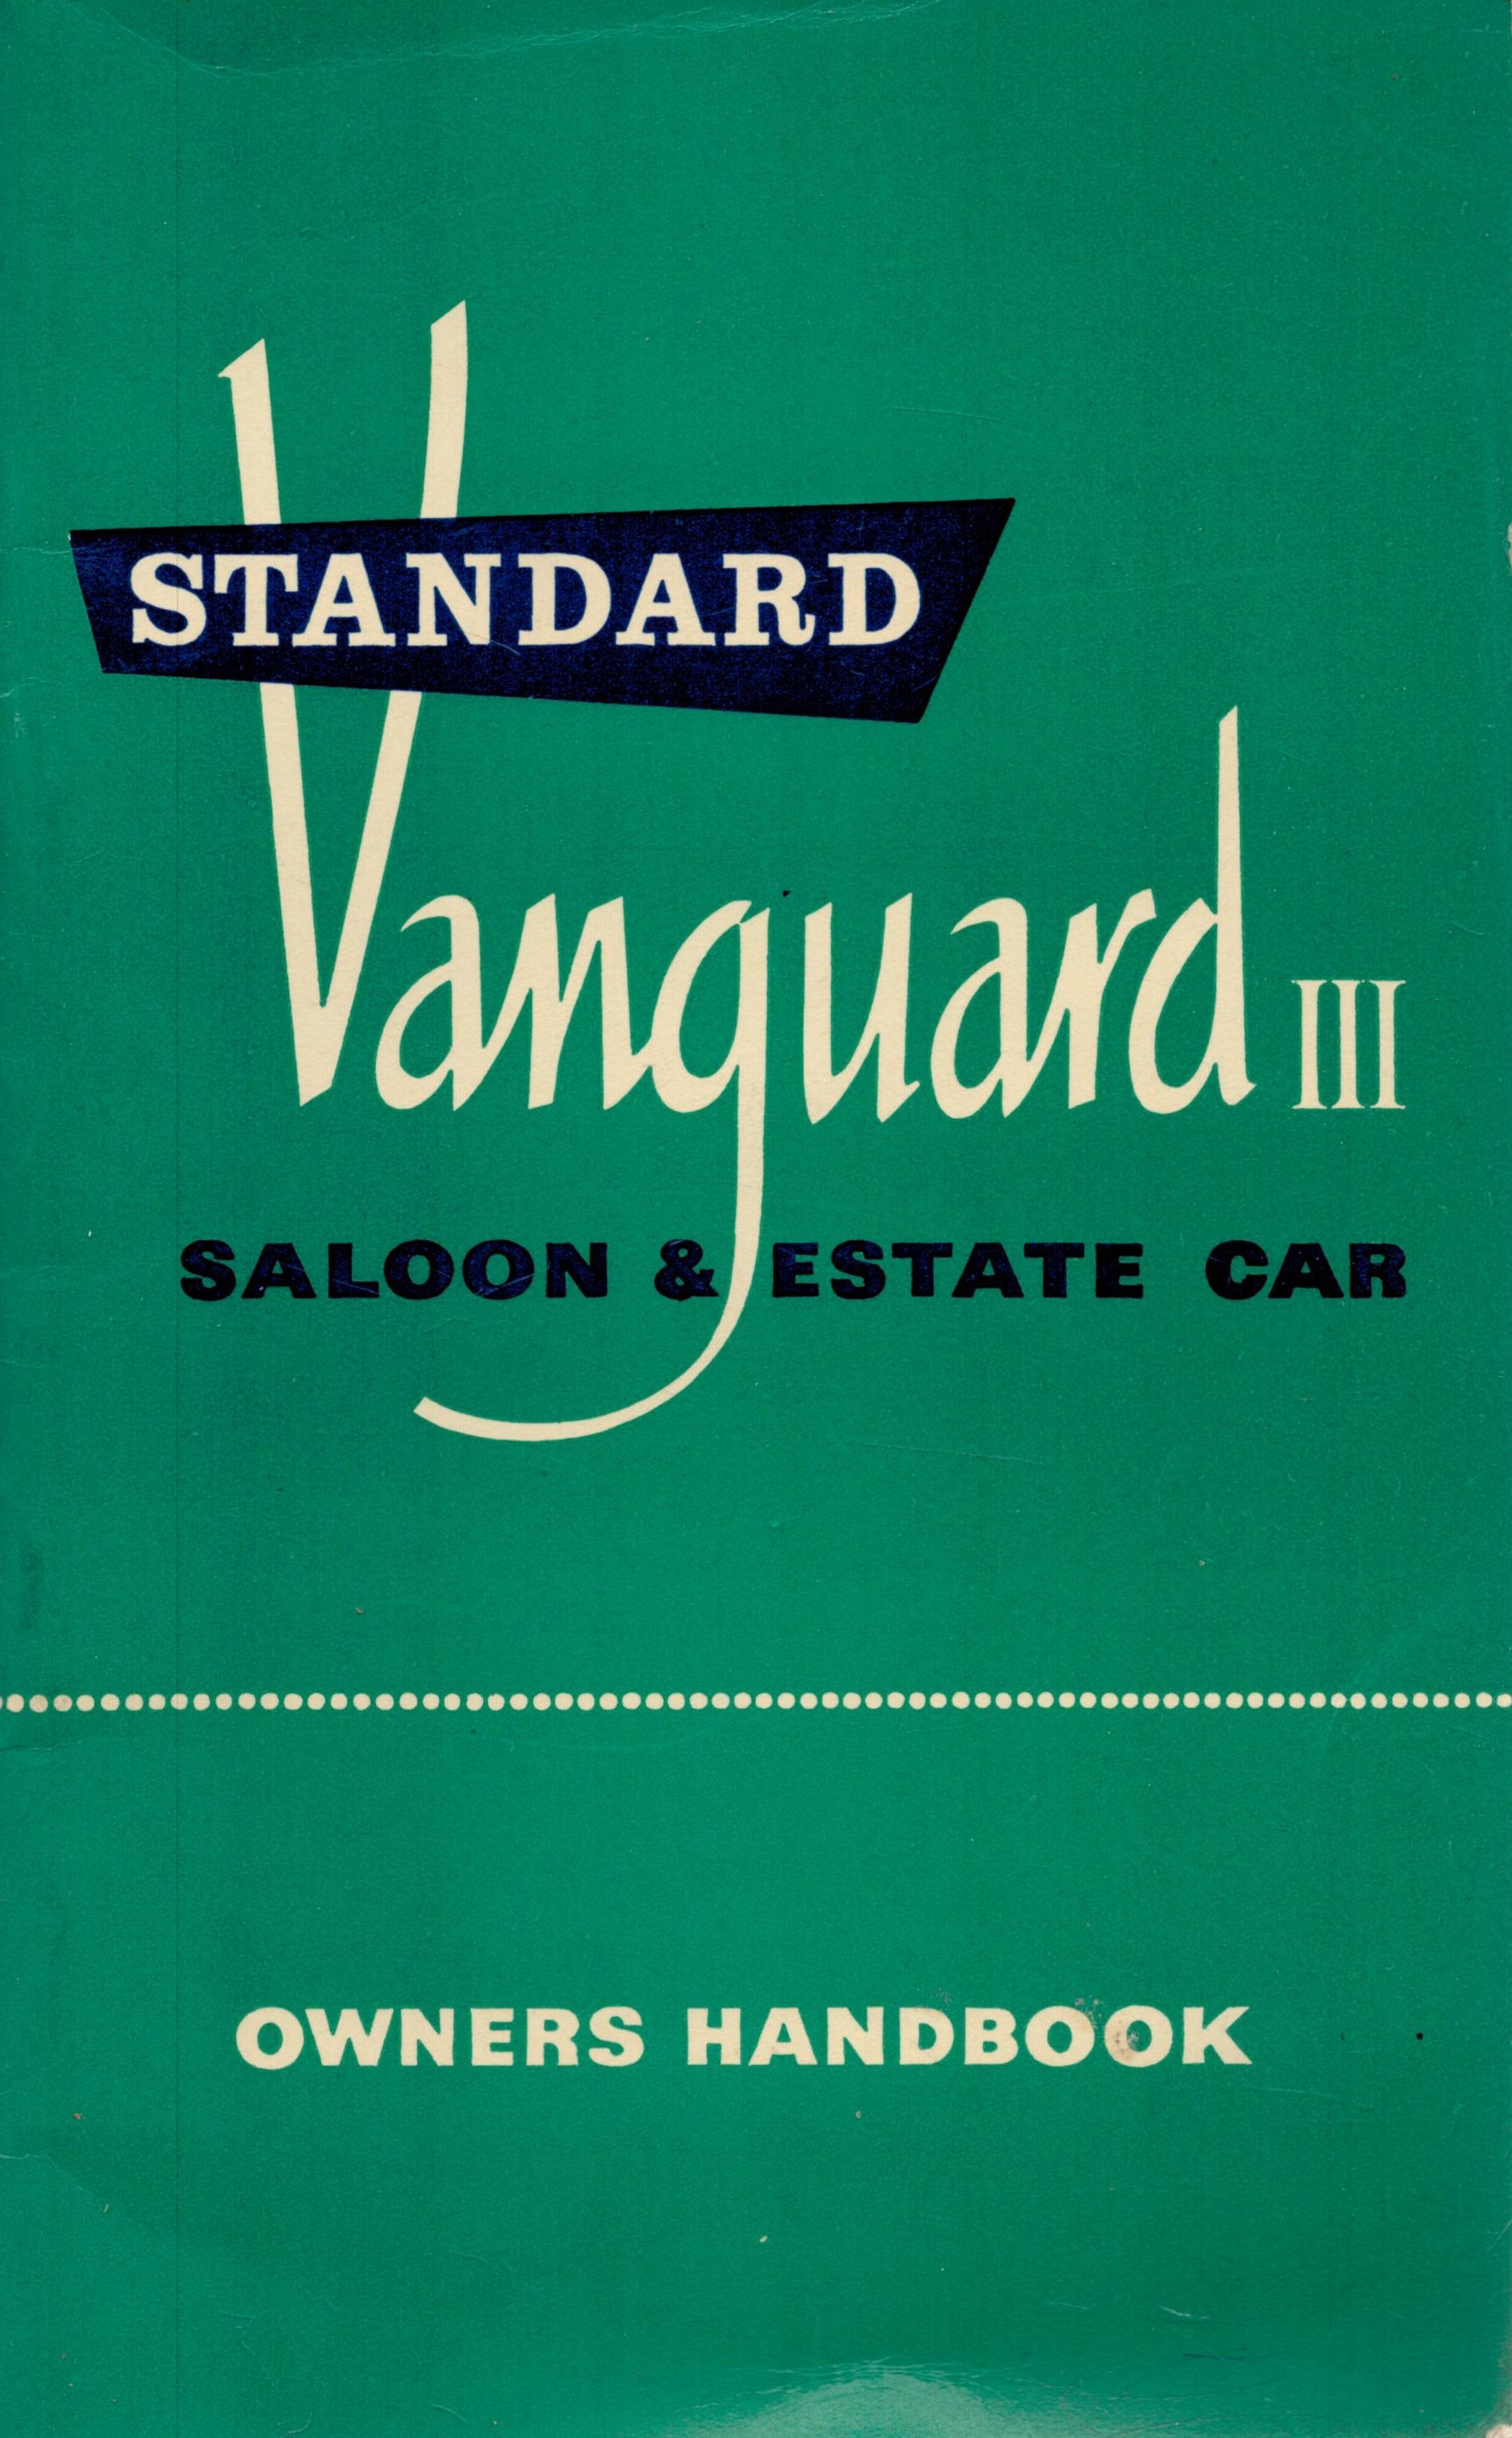 Owner's Handbook of Standard "Vanguard" 111 Saloon and Estate Car. 4 th edition 3rd print. Issued by